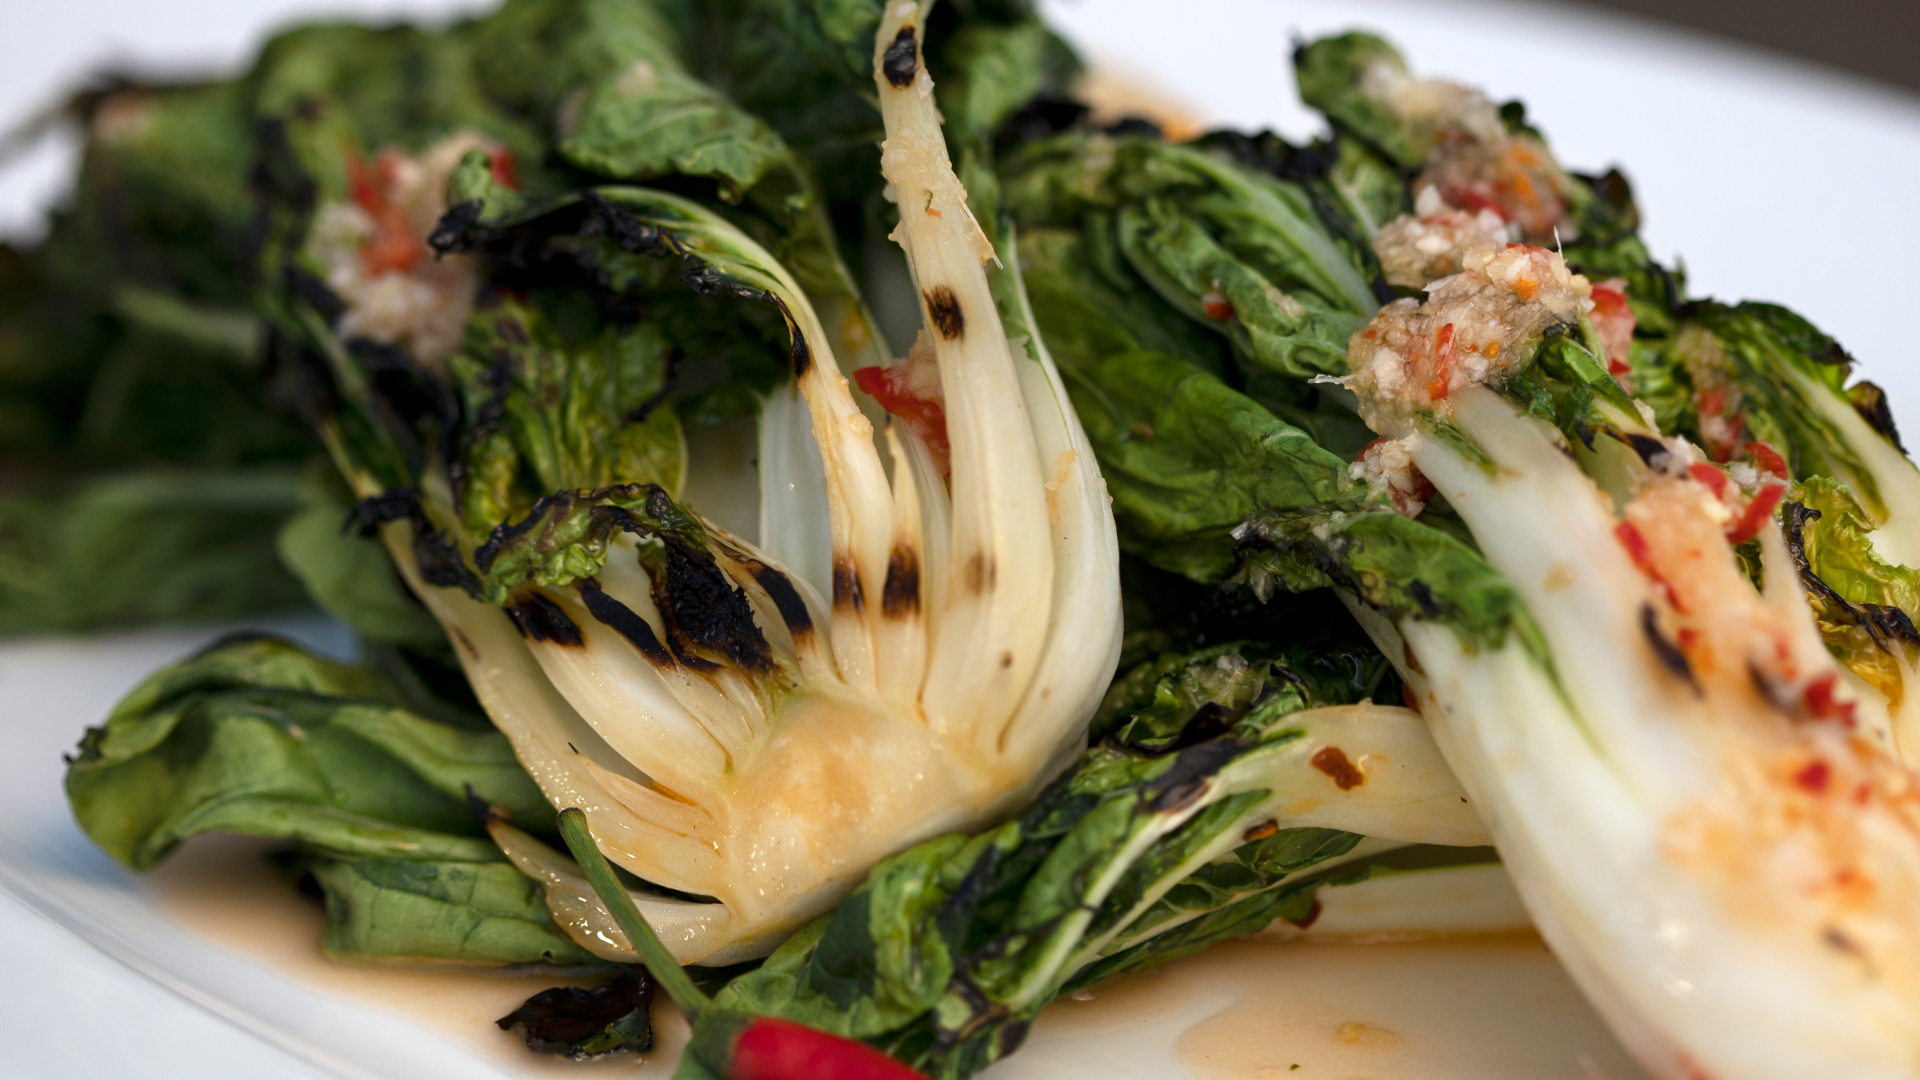 Bok choy with ginger chili sauce